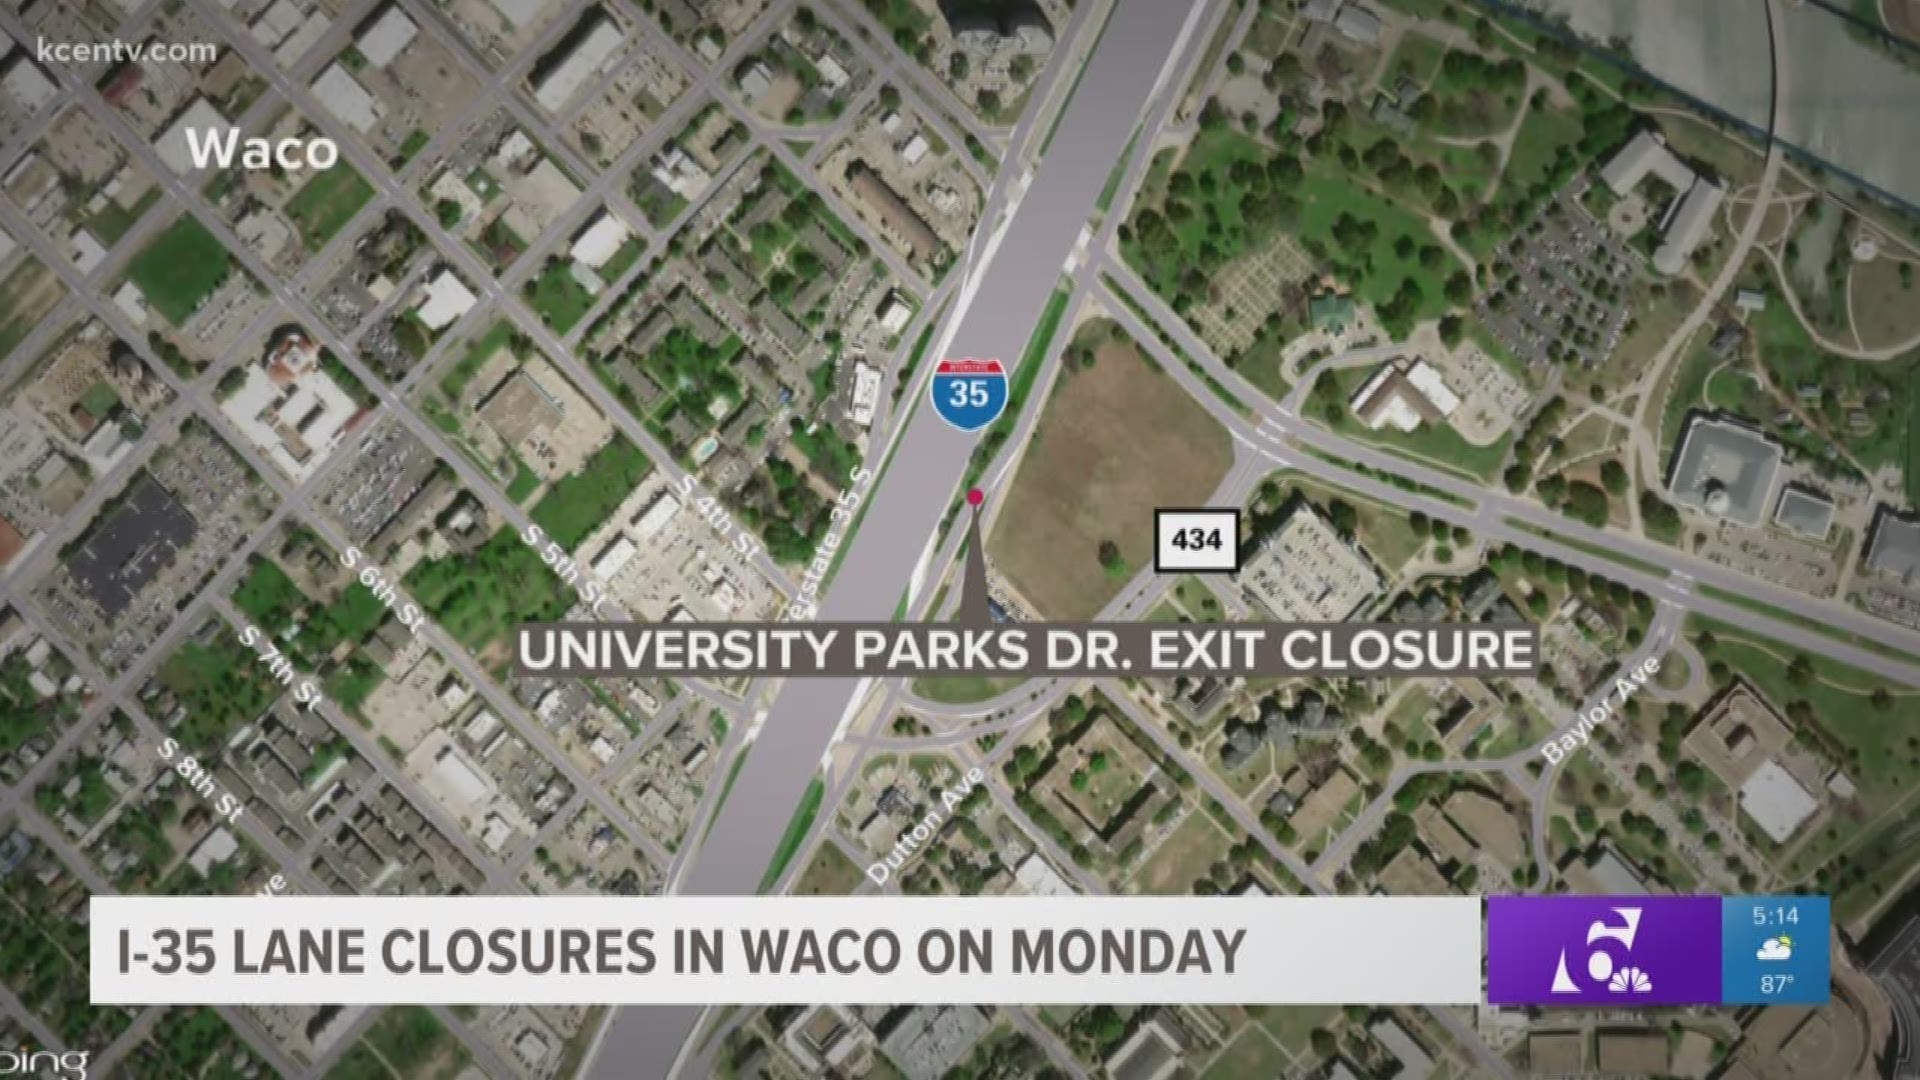 The traffic headaches will only get worse when TxDot closes the northbound University Parks Dr. exit.